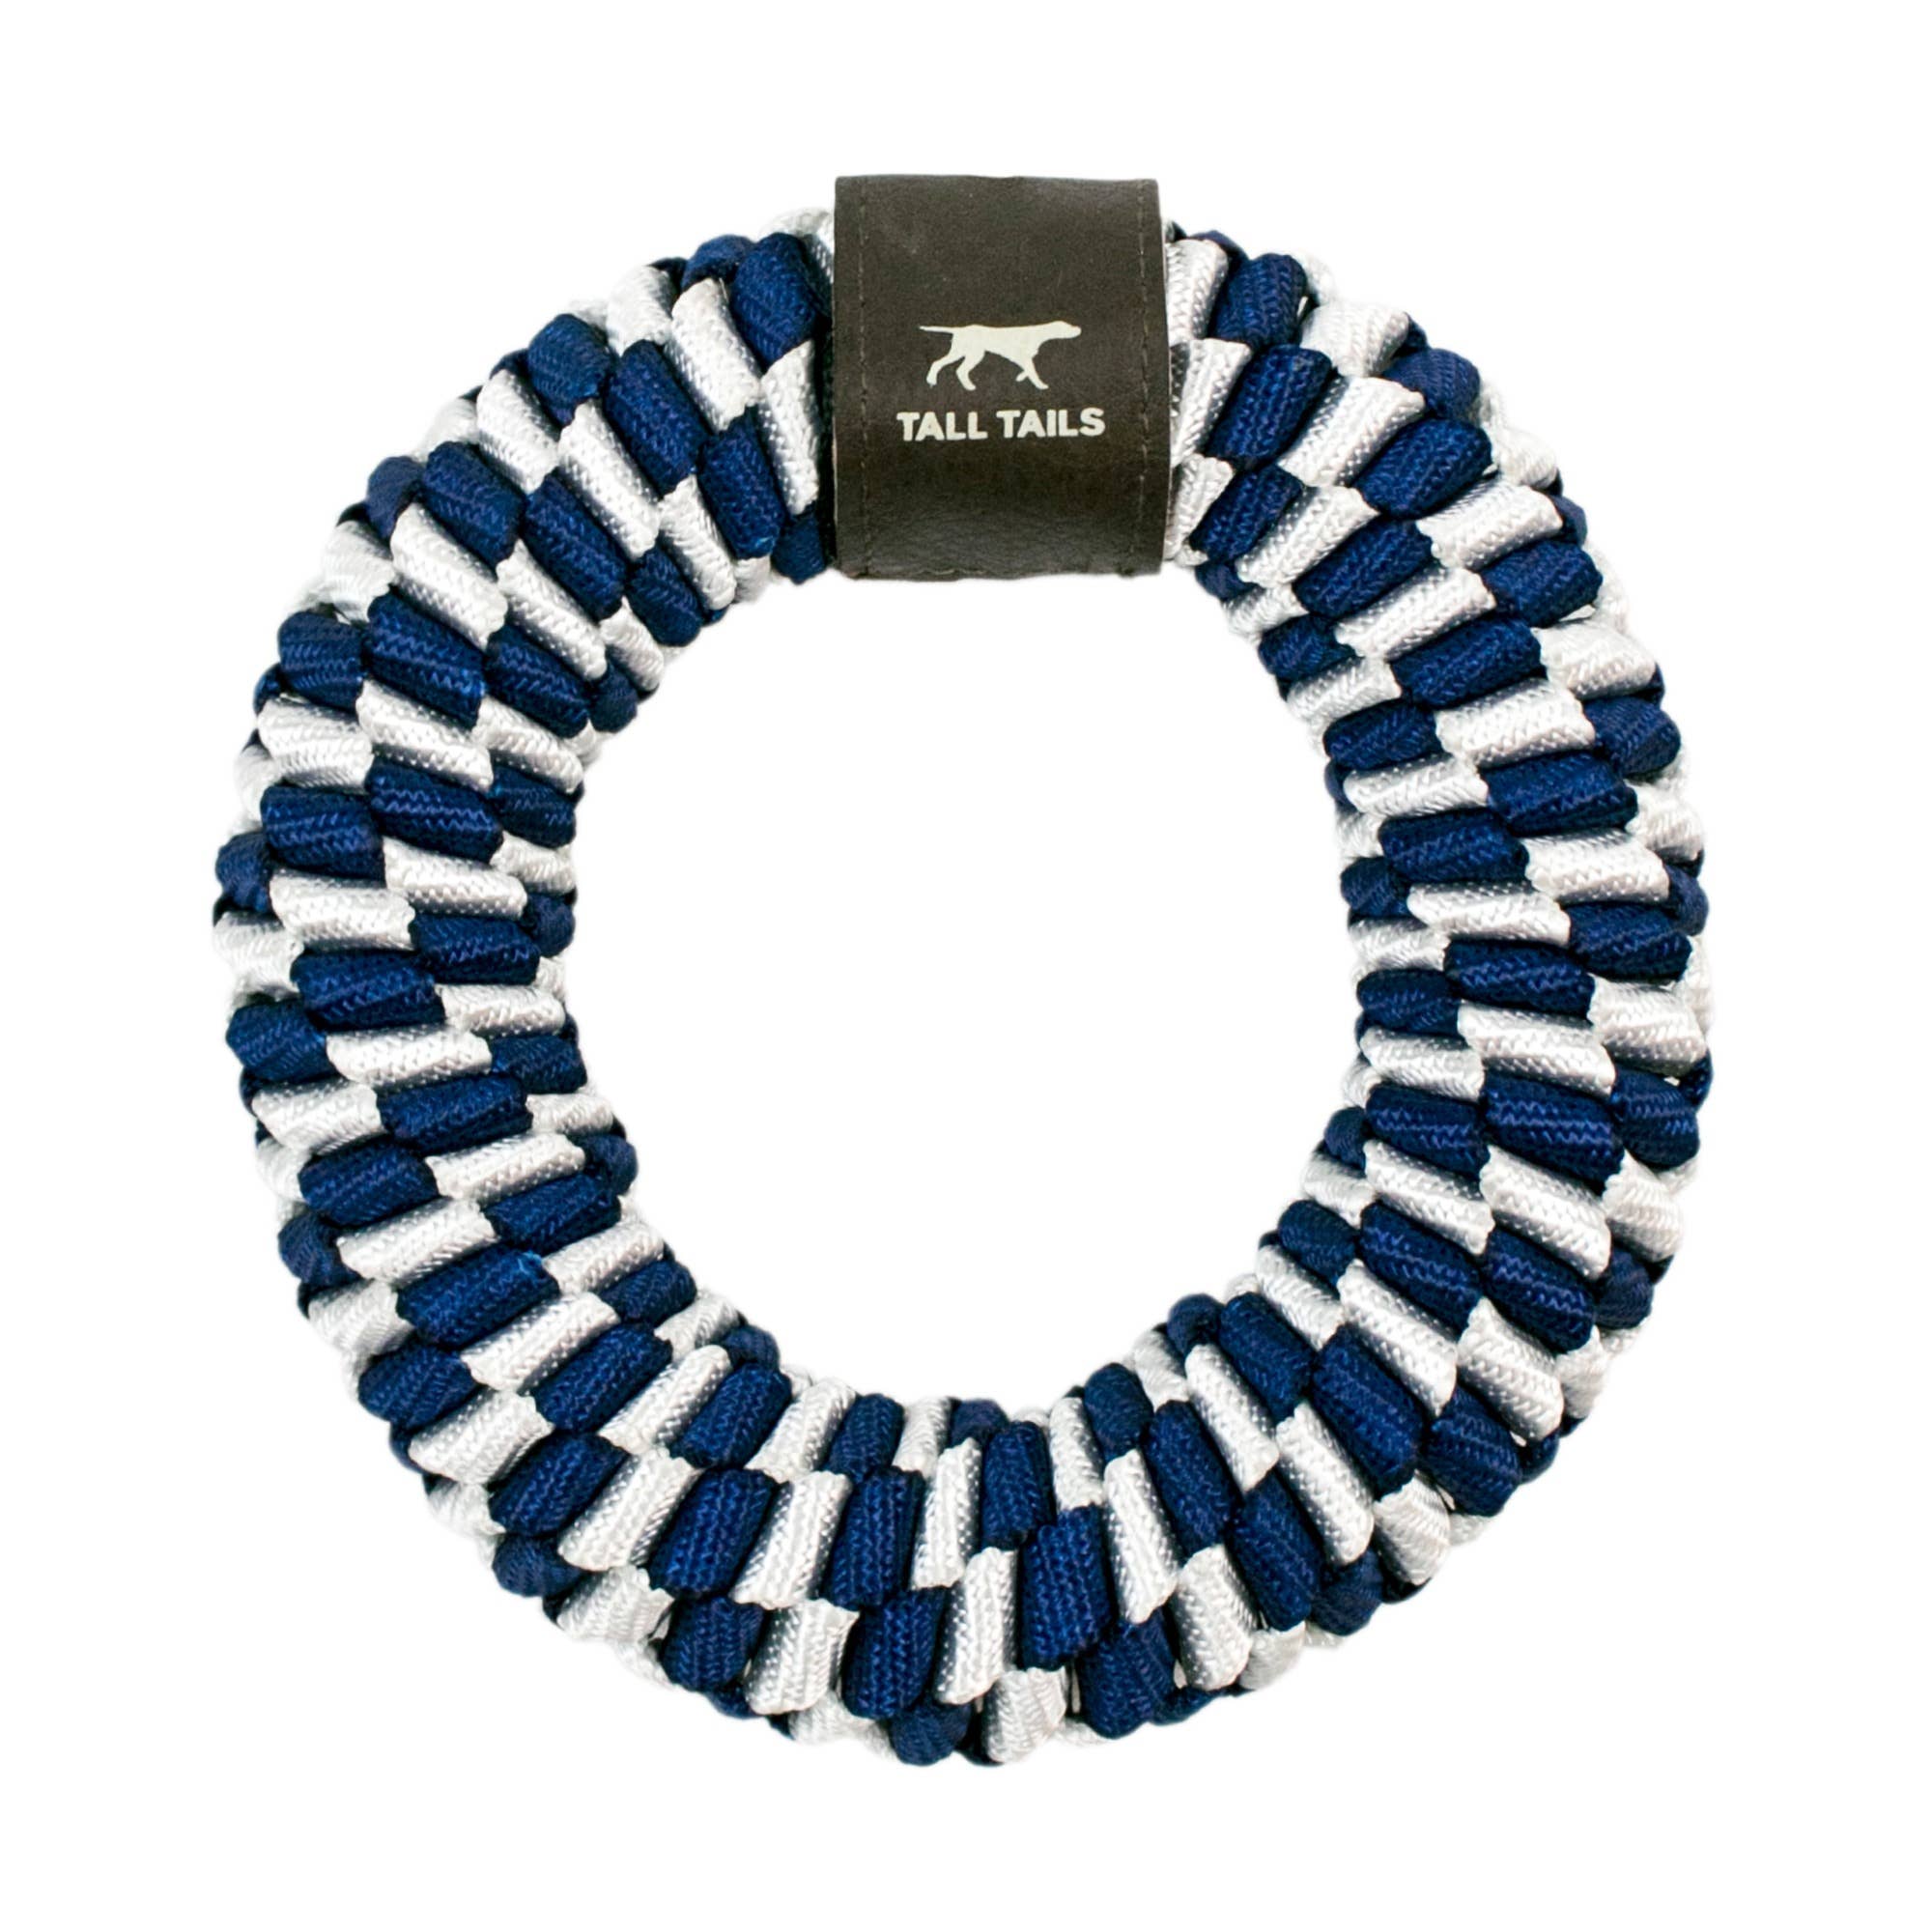 Tall Tails - 6" Braided Ring Toy, Navy